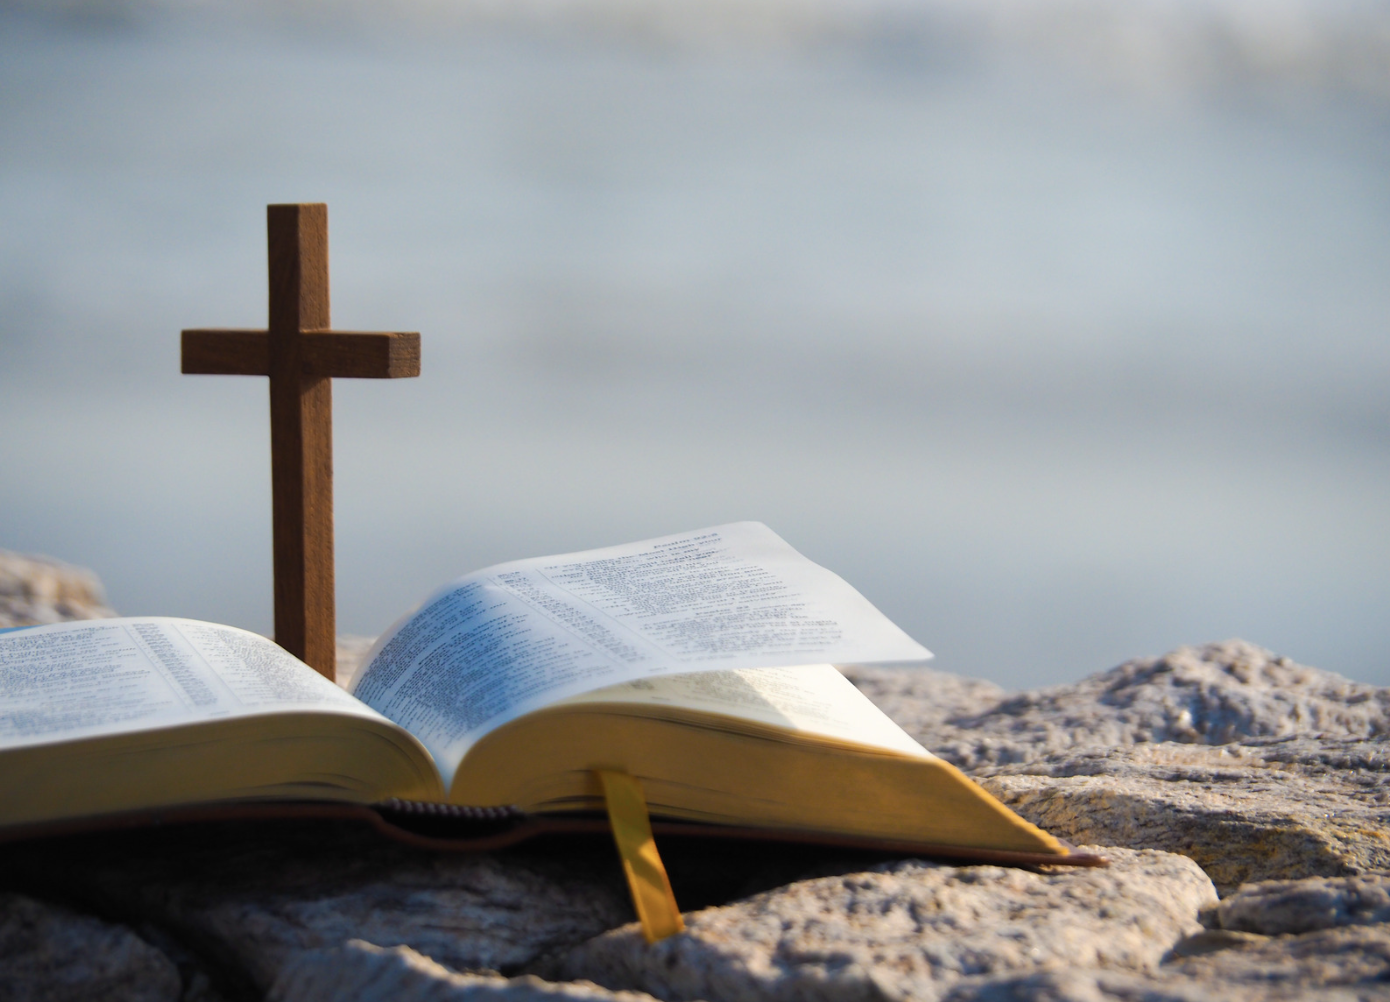 A wooden cross stands in front of an opened bible on the rocks.